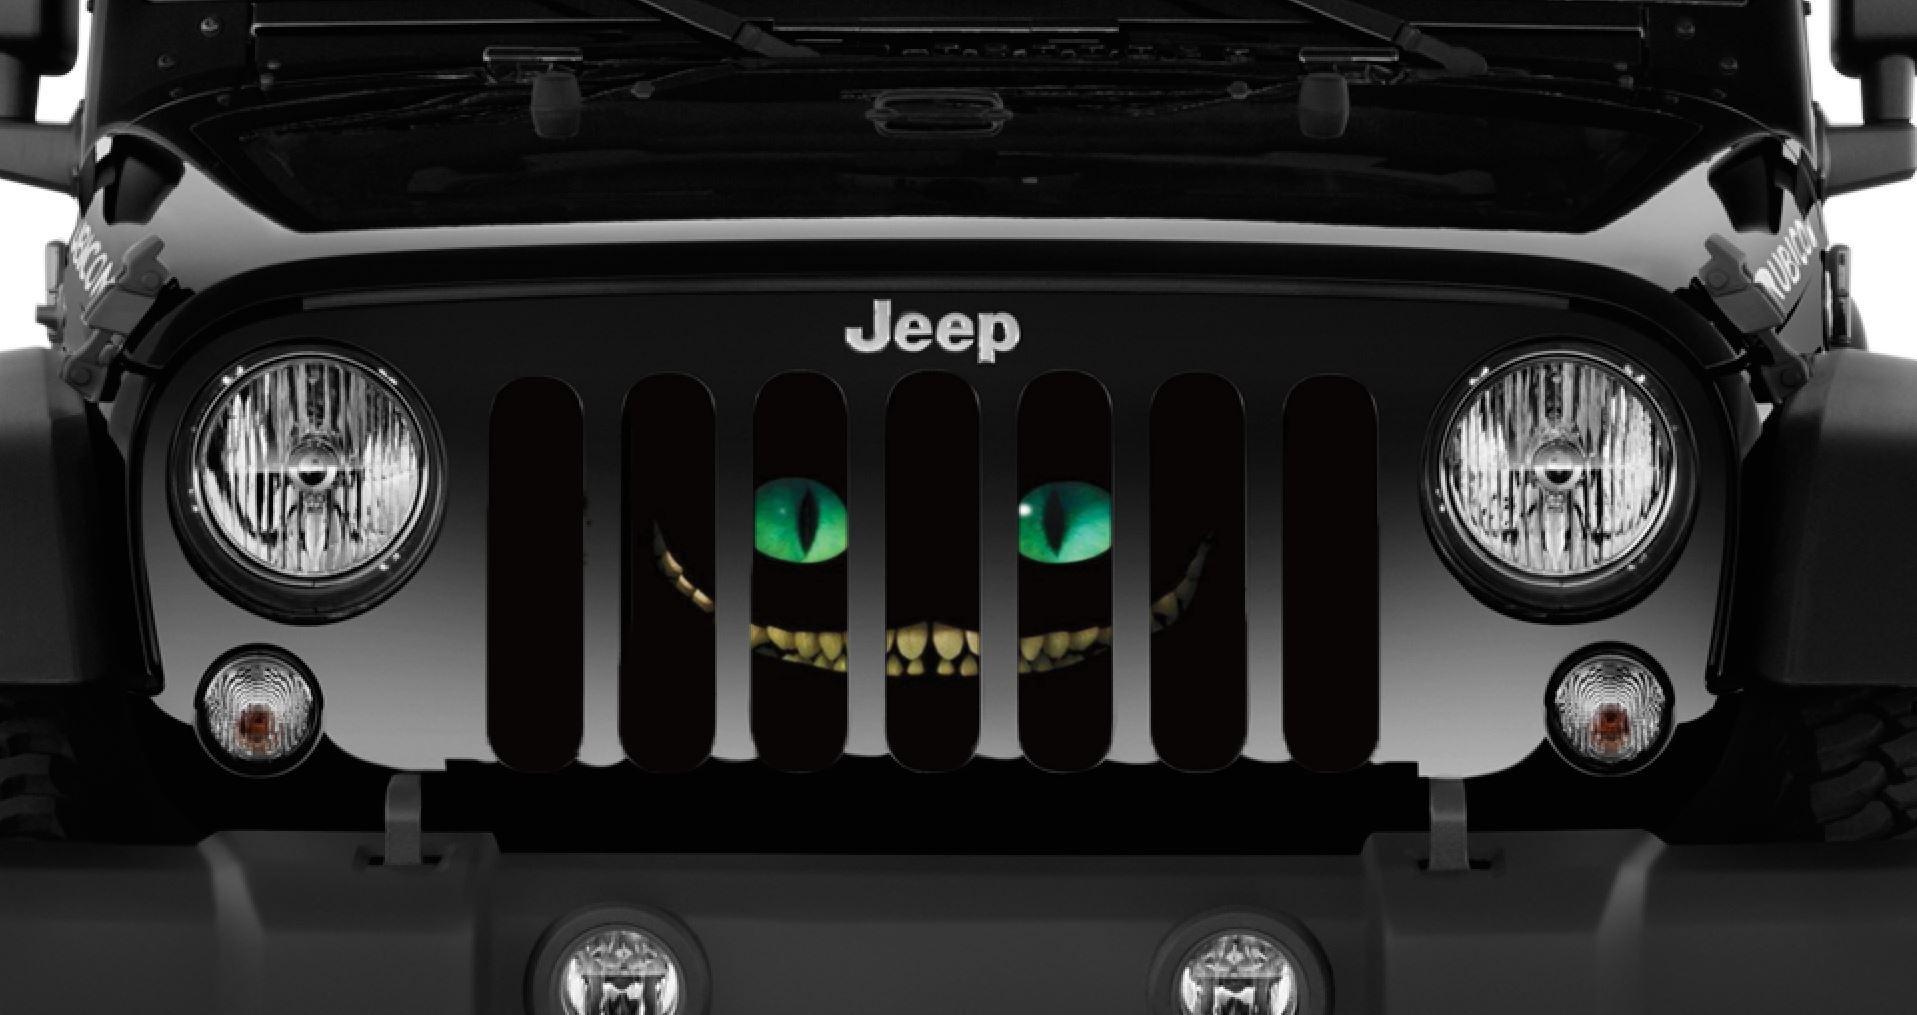 Jeep Grill Logo - Custom Jeep Grille Insert – Dirty Acres